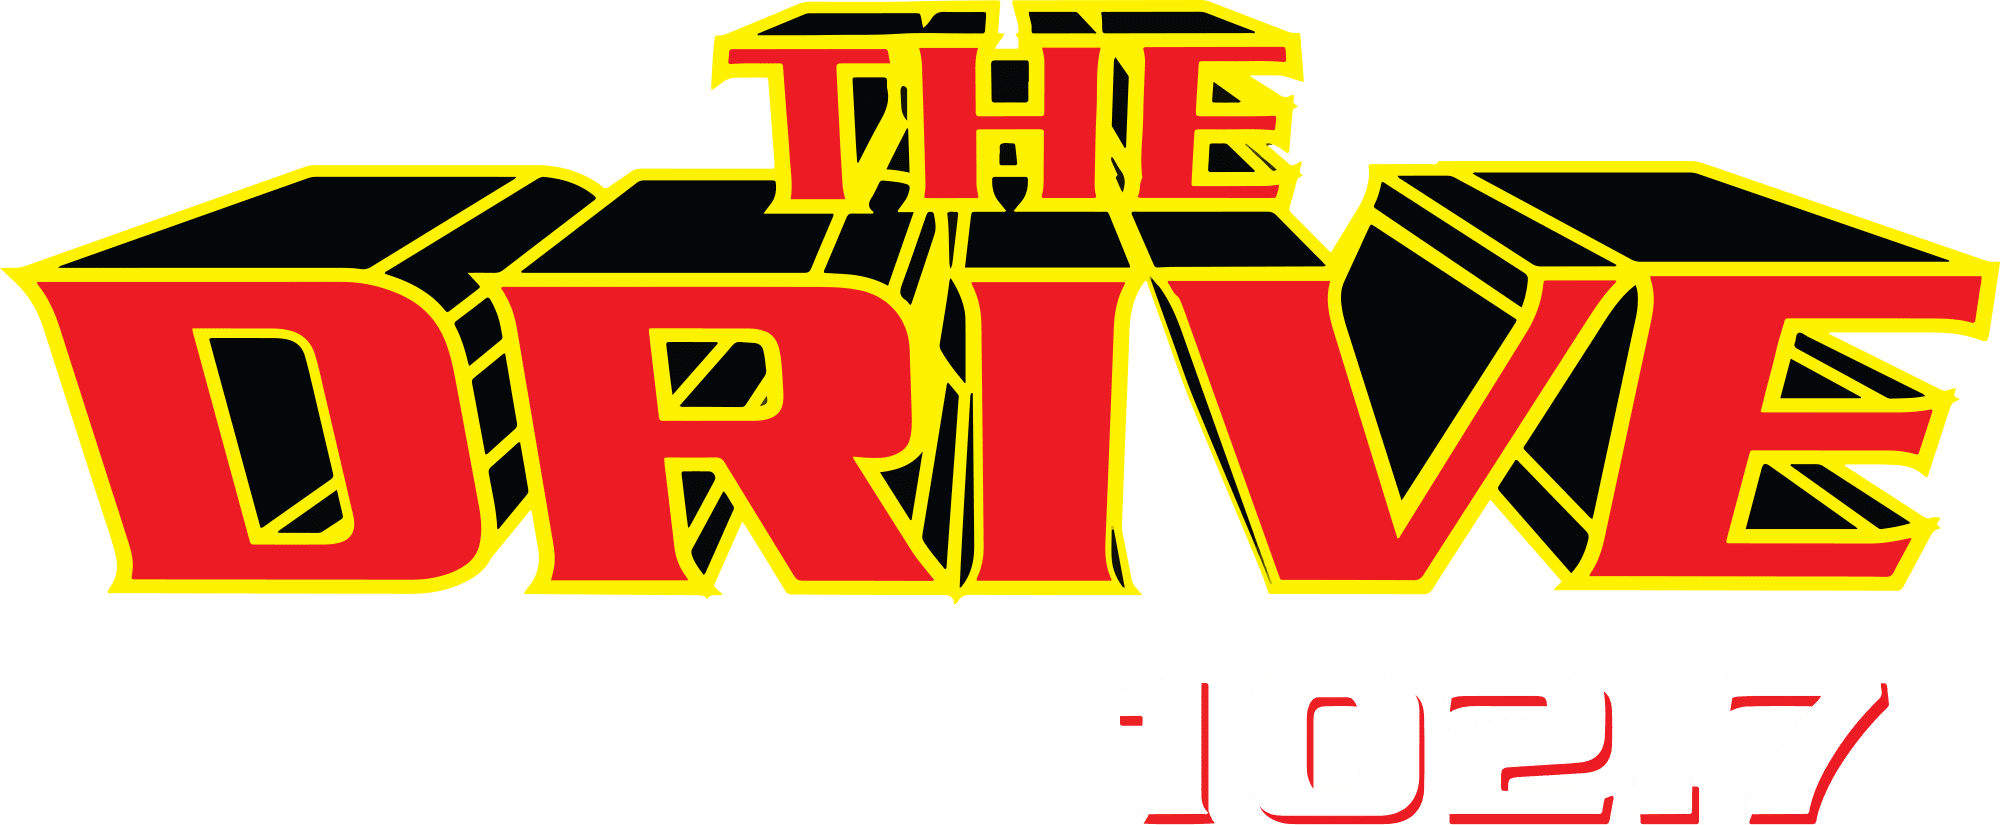 The Drive 102.7 - Opus Broadcasting